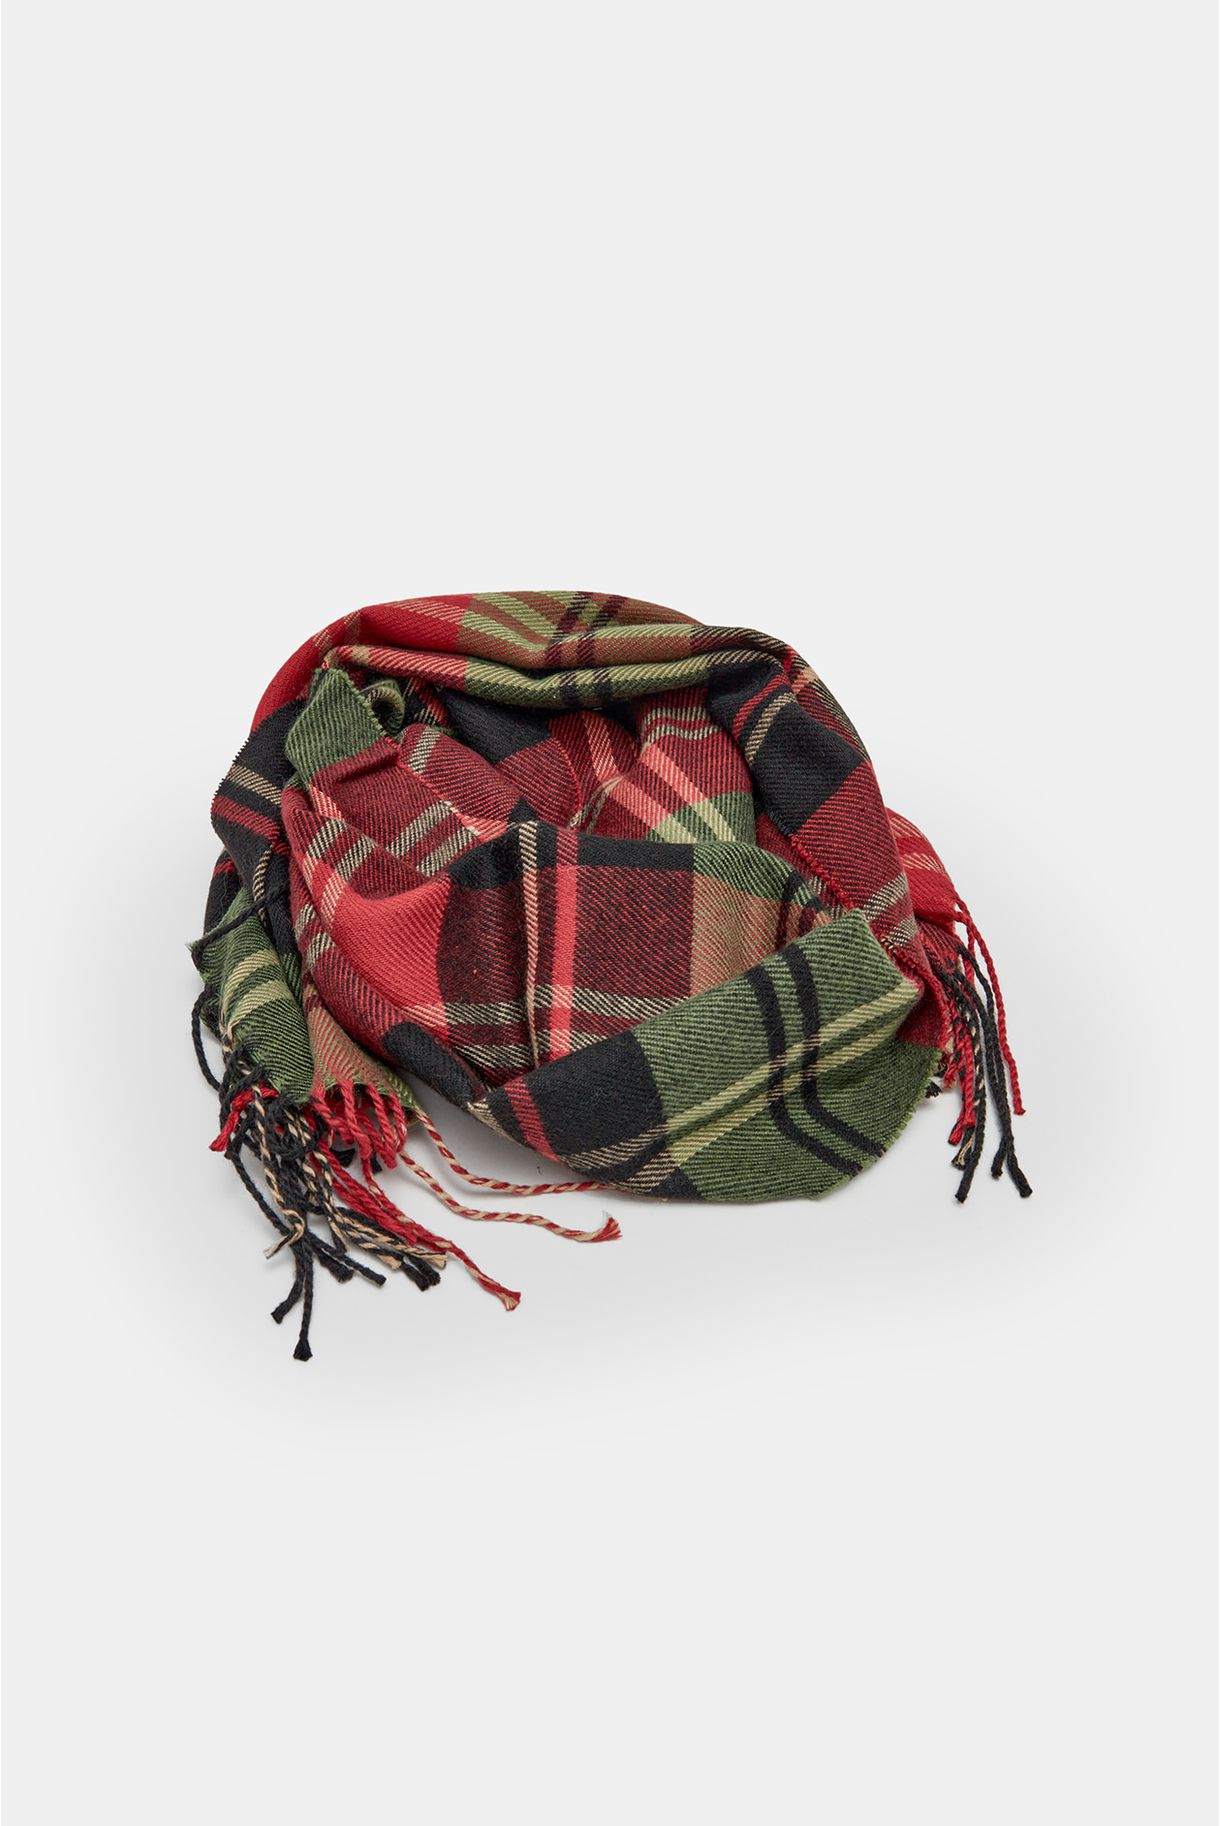 Red and green plaid scarf